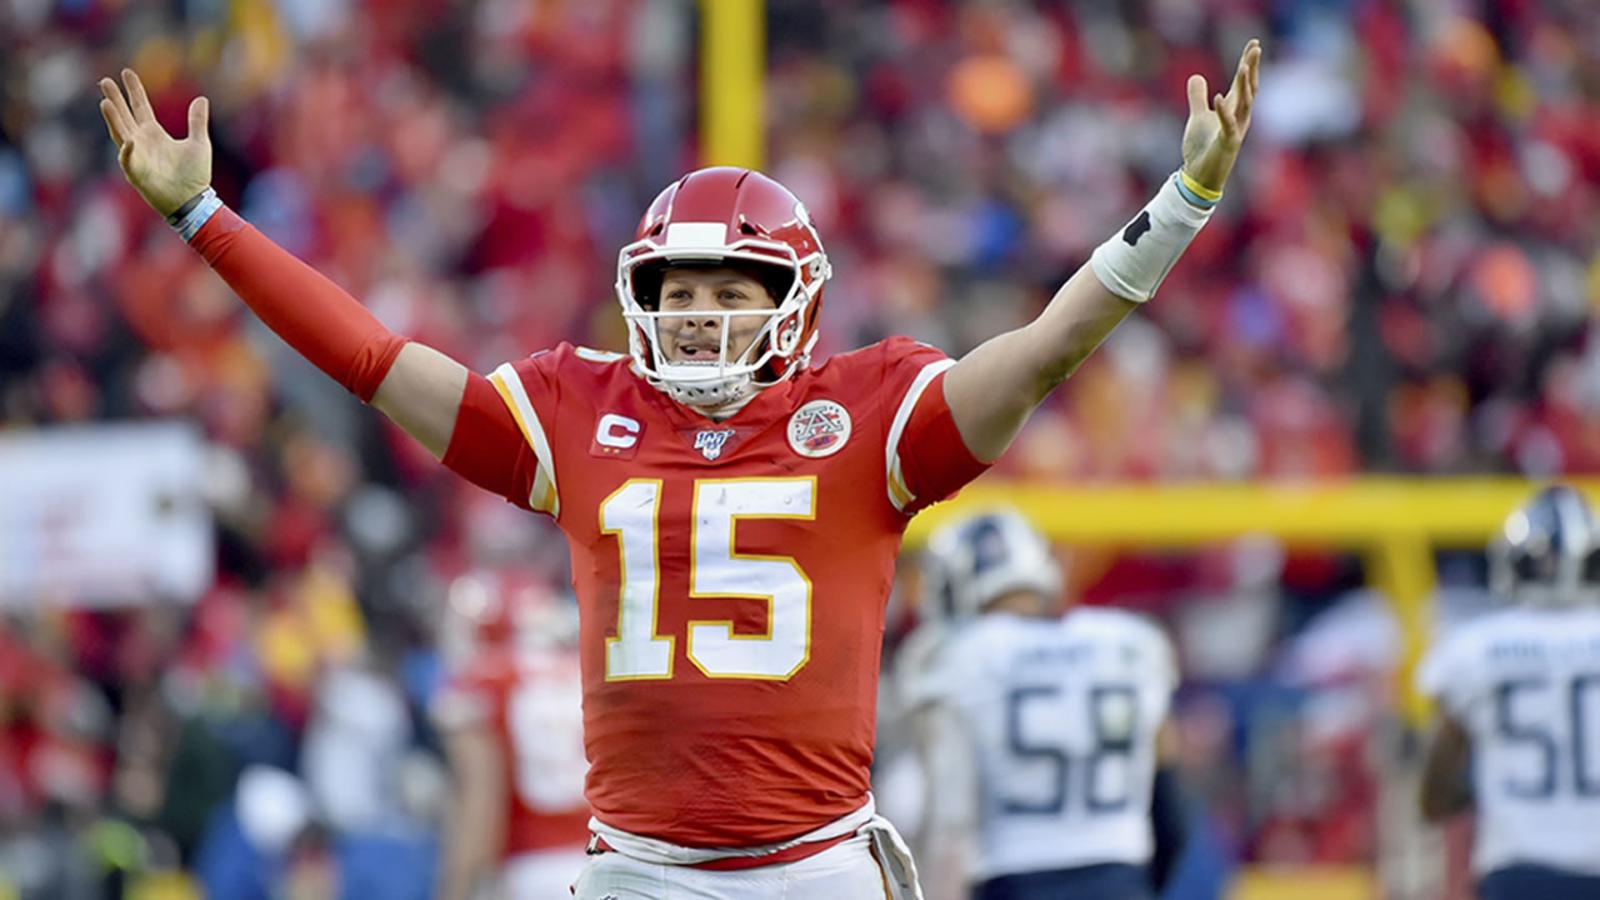 Kansas City Chiefs advance to Super Bowl after defeating